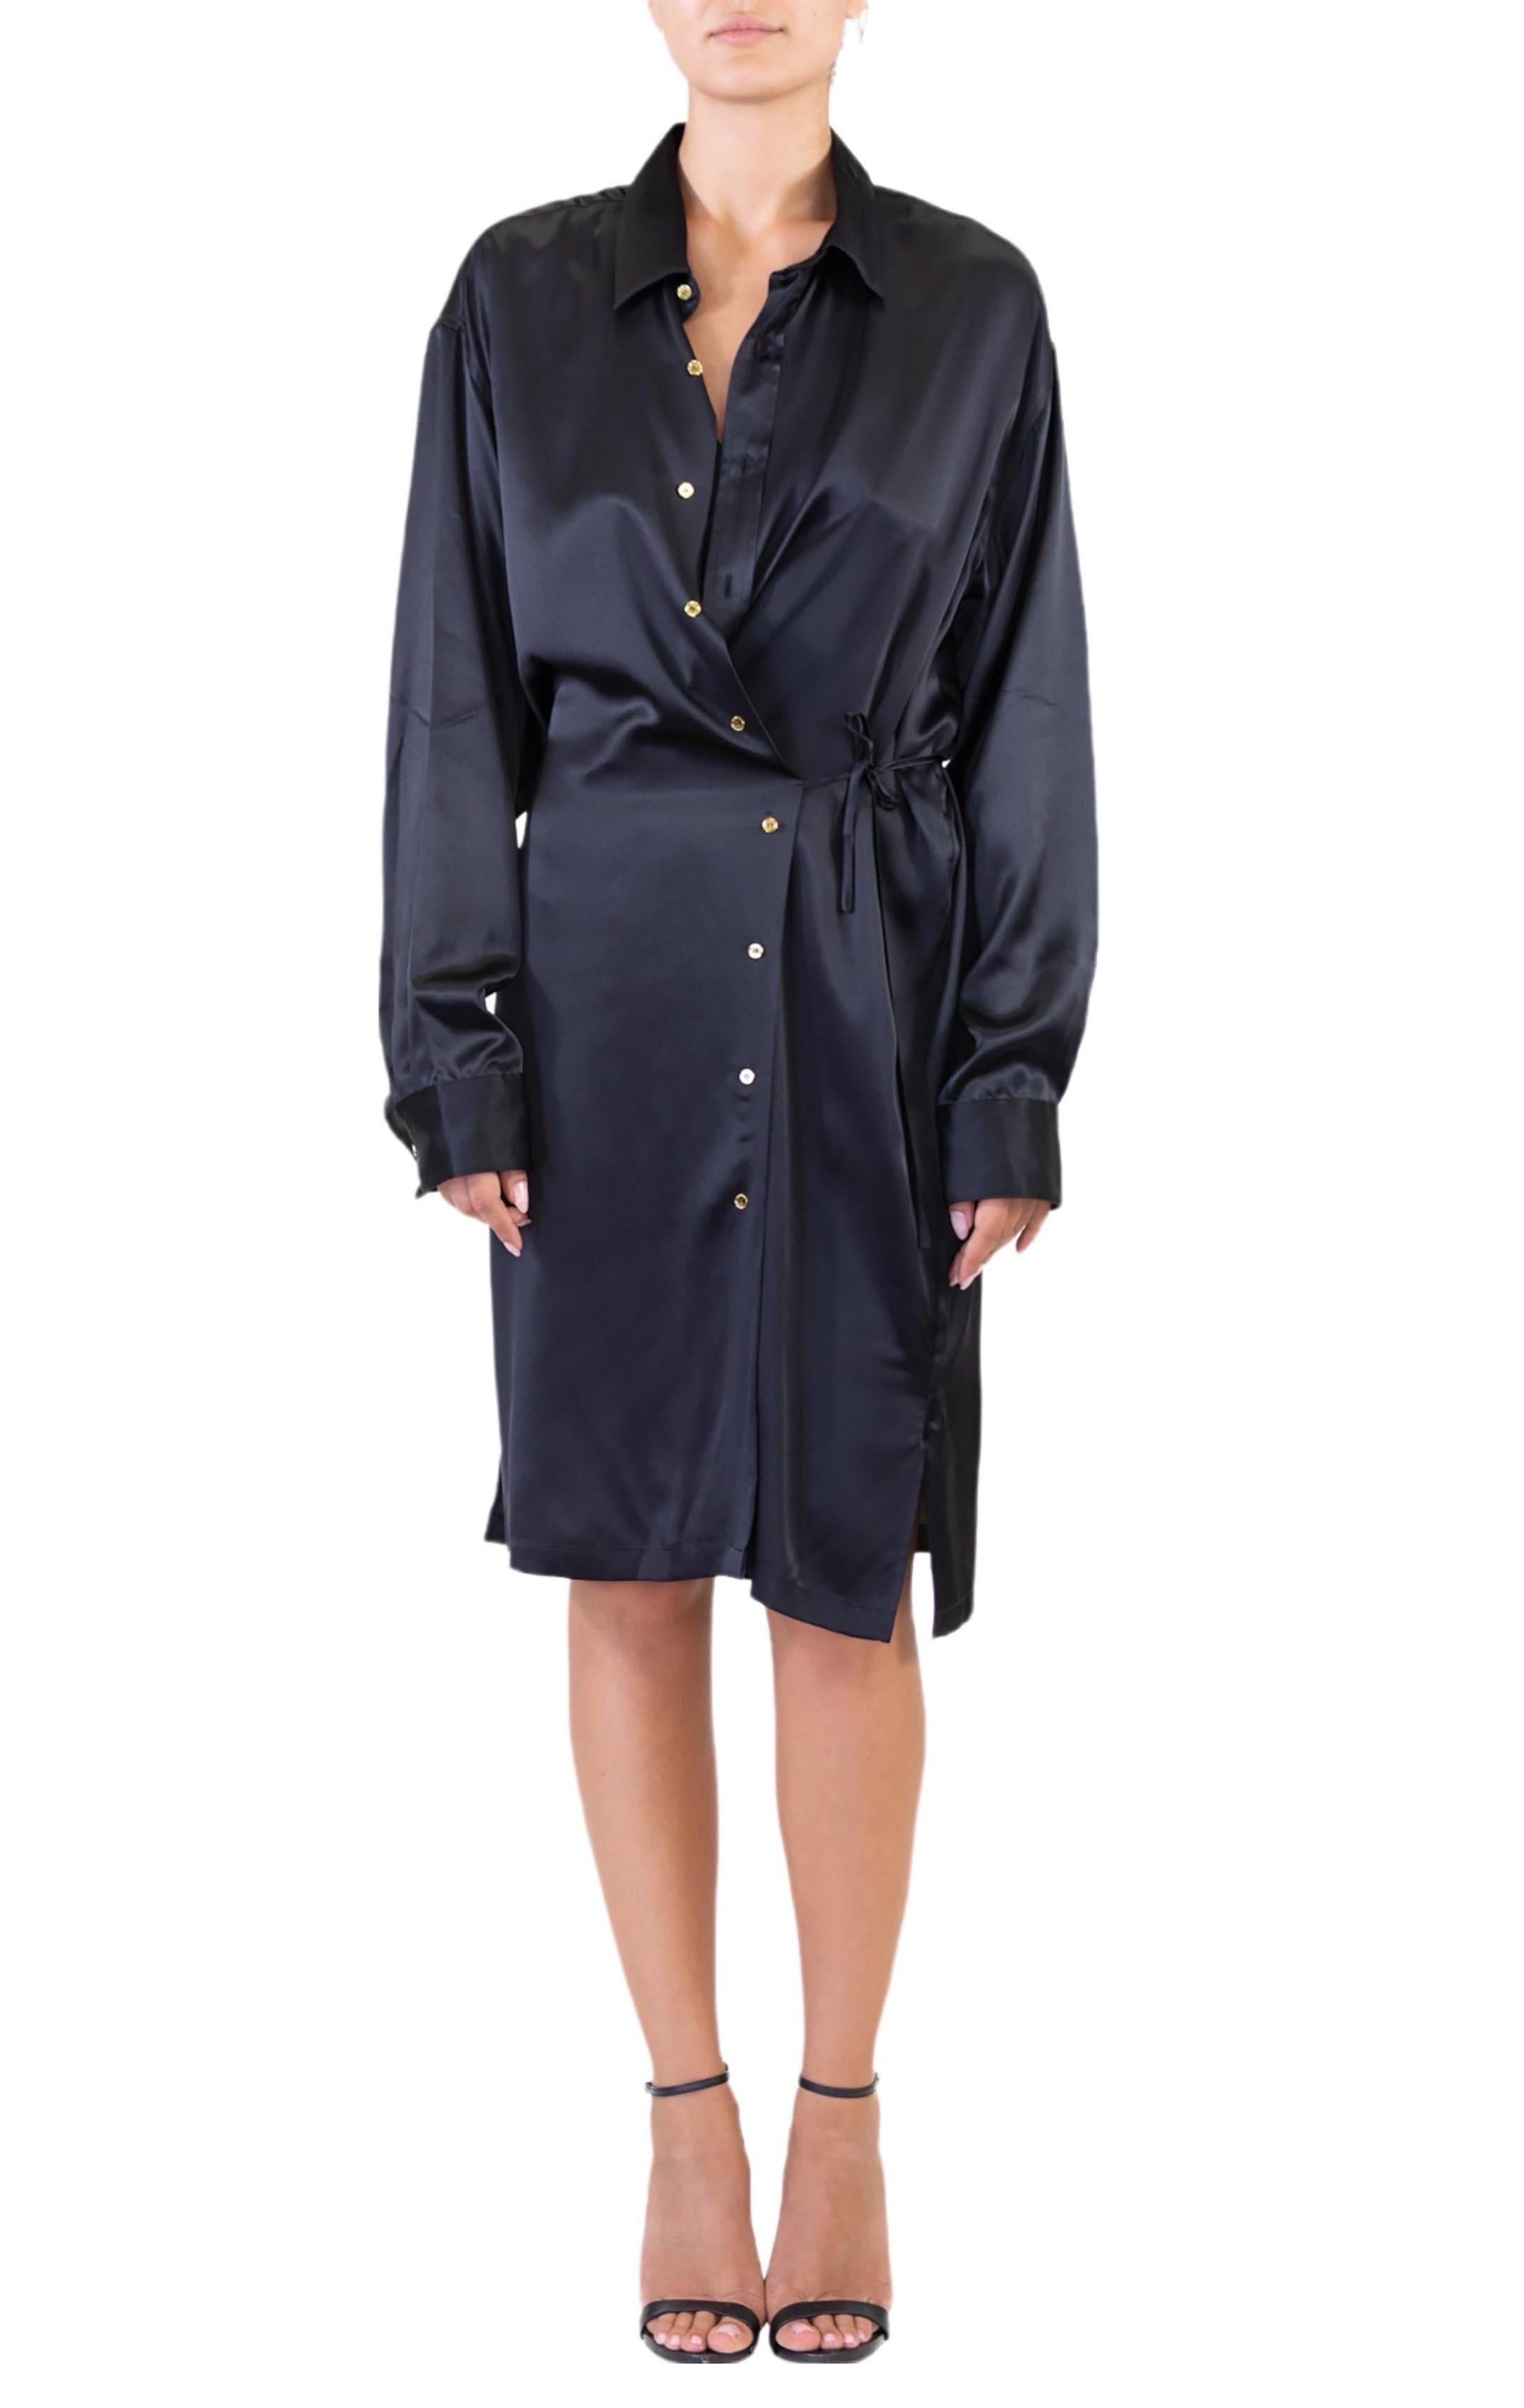 MORPHEW COLLECTION Black Silk Charmeuse Oversized Button Down Shirt Dress
MORPHEW COLLECTION is made entirely by hand in our NYC Ateliér of rare antique materials sourced from around the globe. Our sustainable vintage materials represent over a